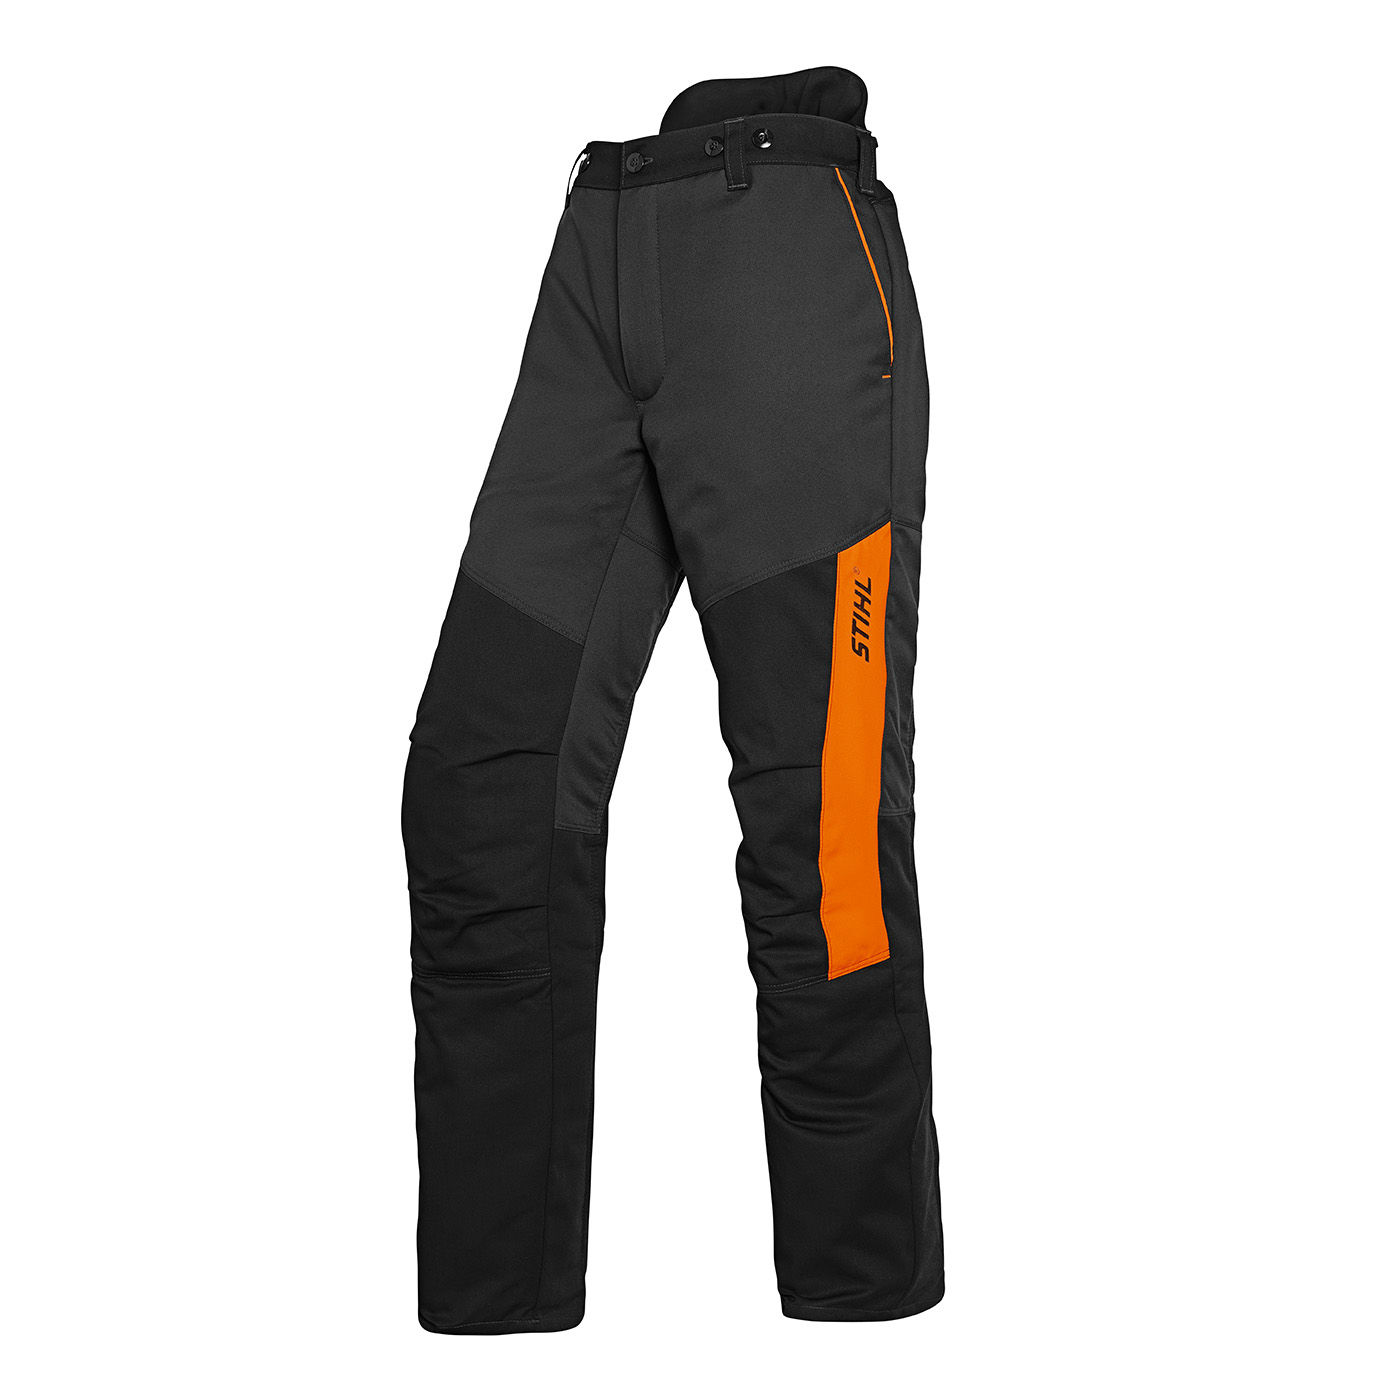 Stihl Flame-Resistant Forestry Pants - 28/30 waist - Trailgo